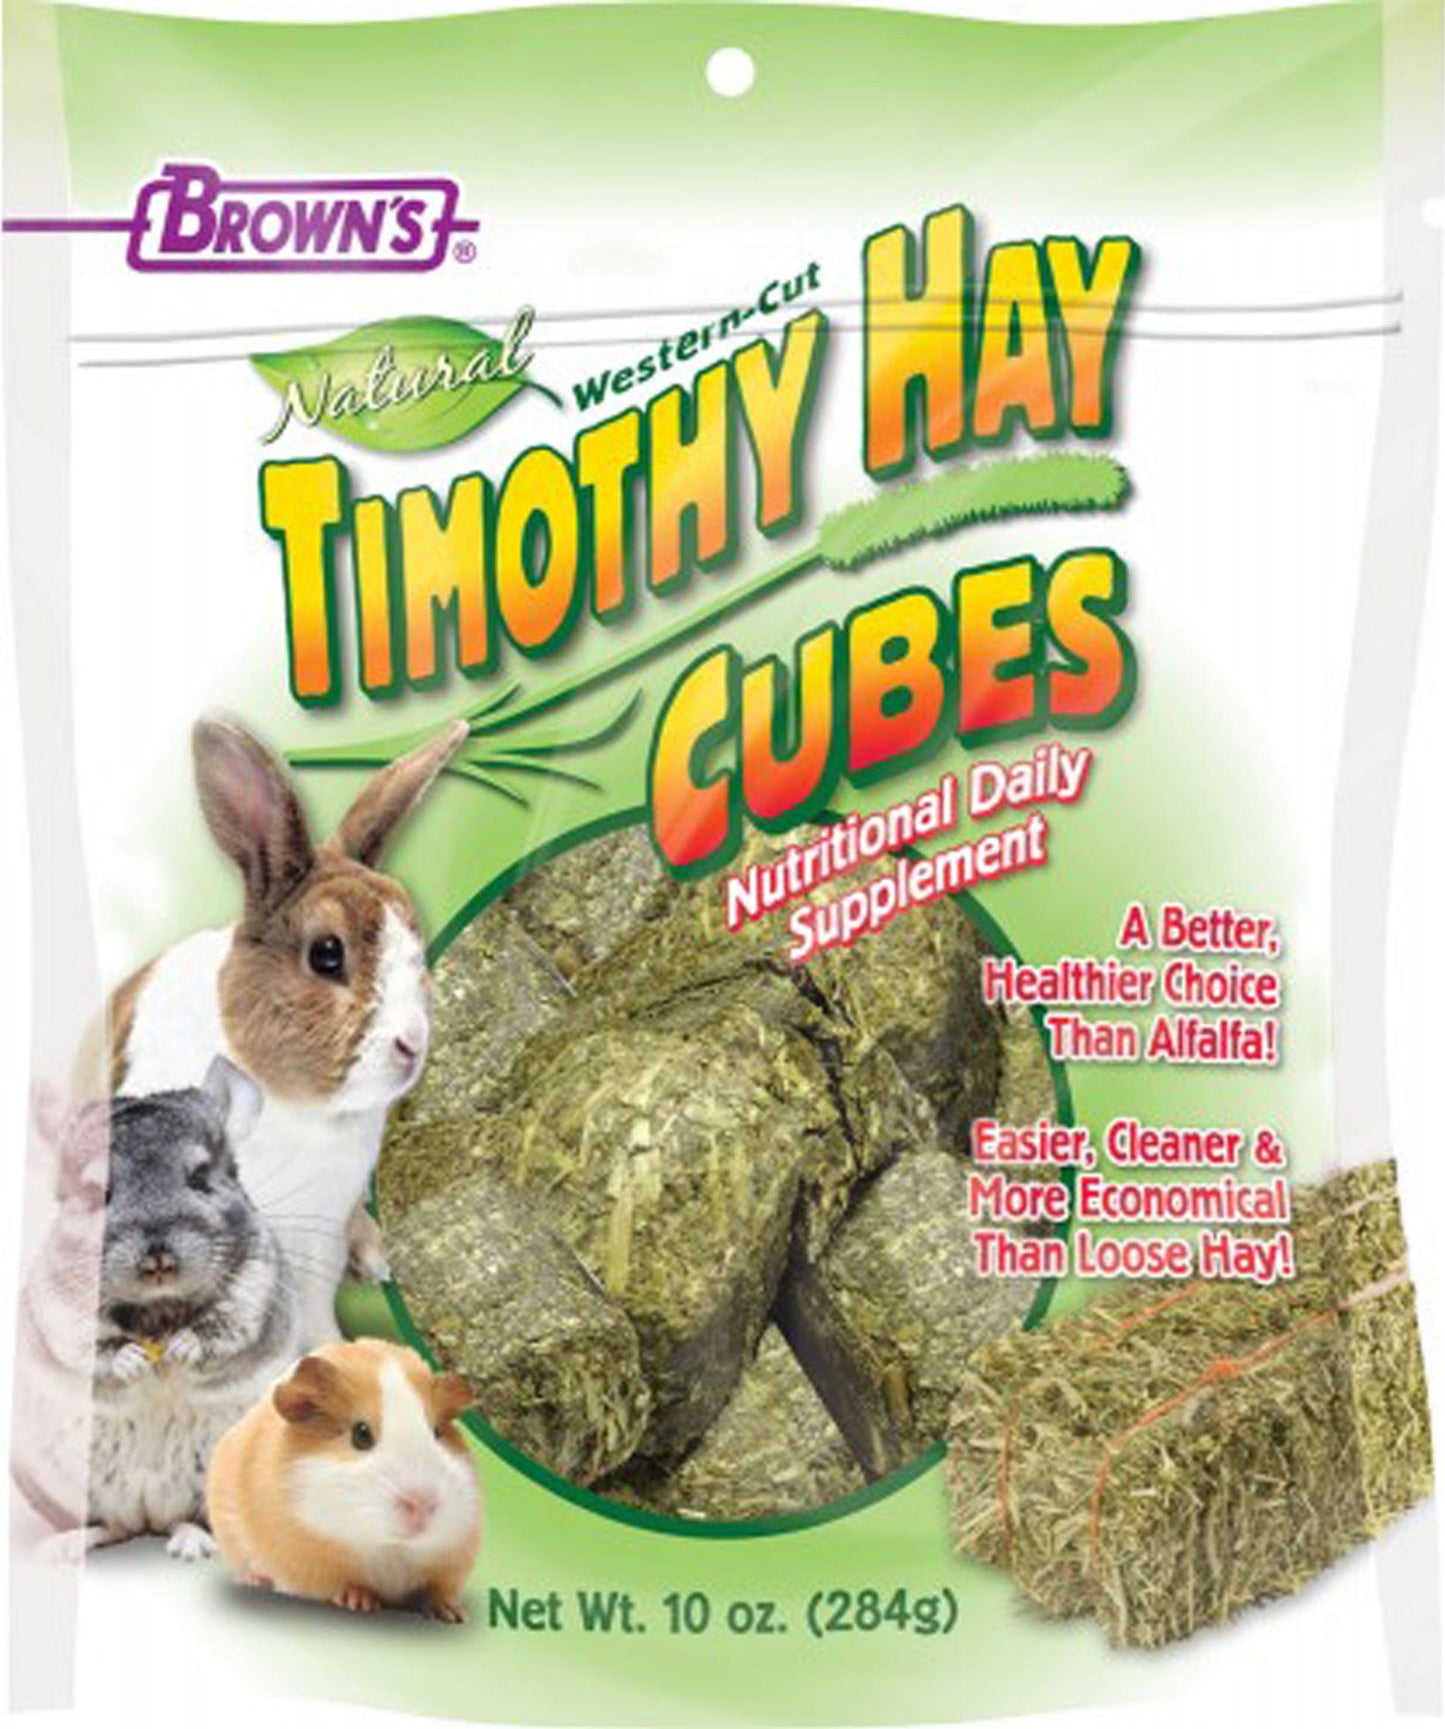 Timothy Hay Cube - aomega-products